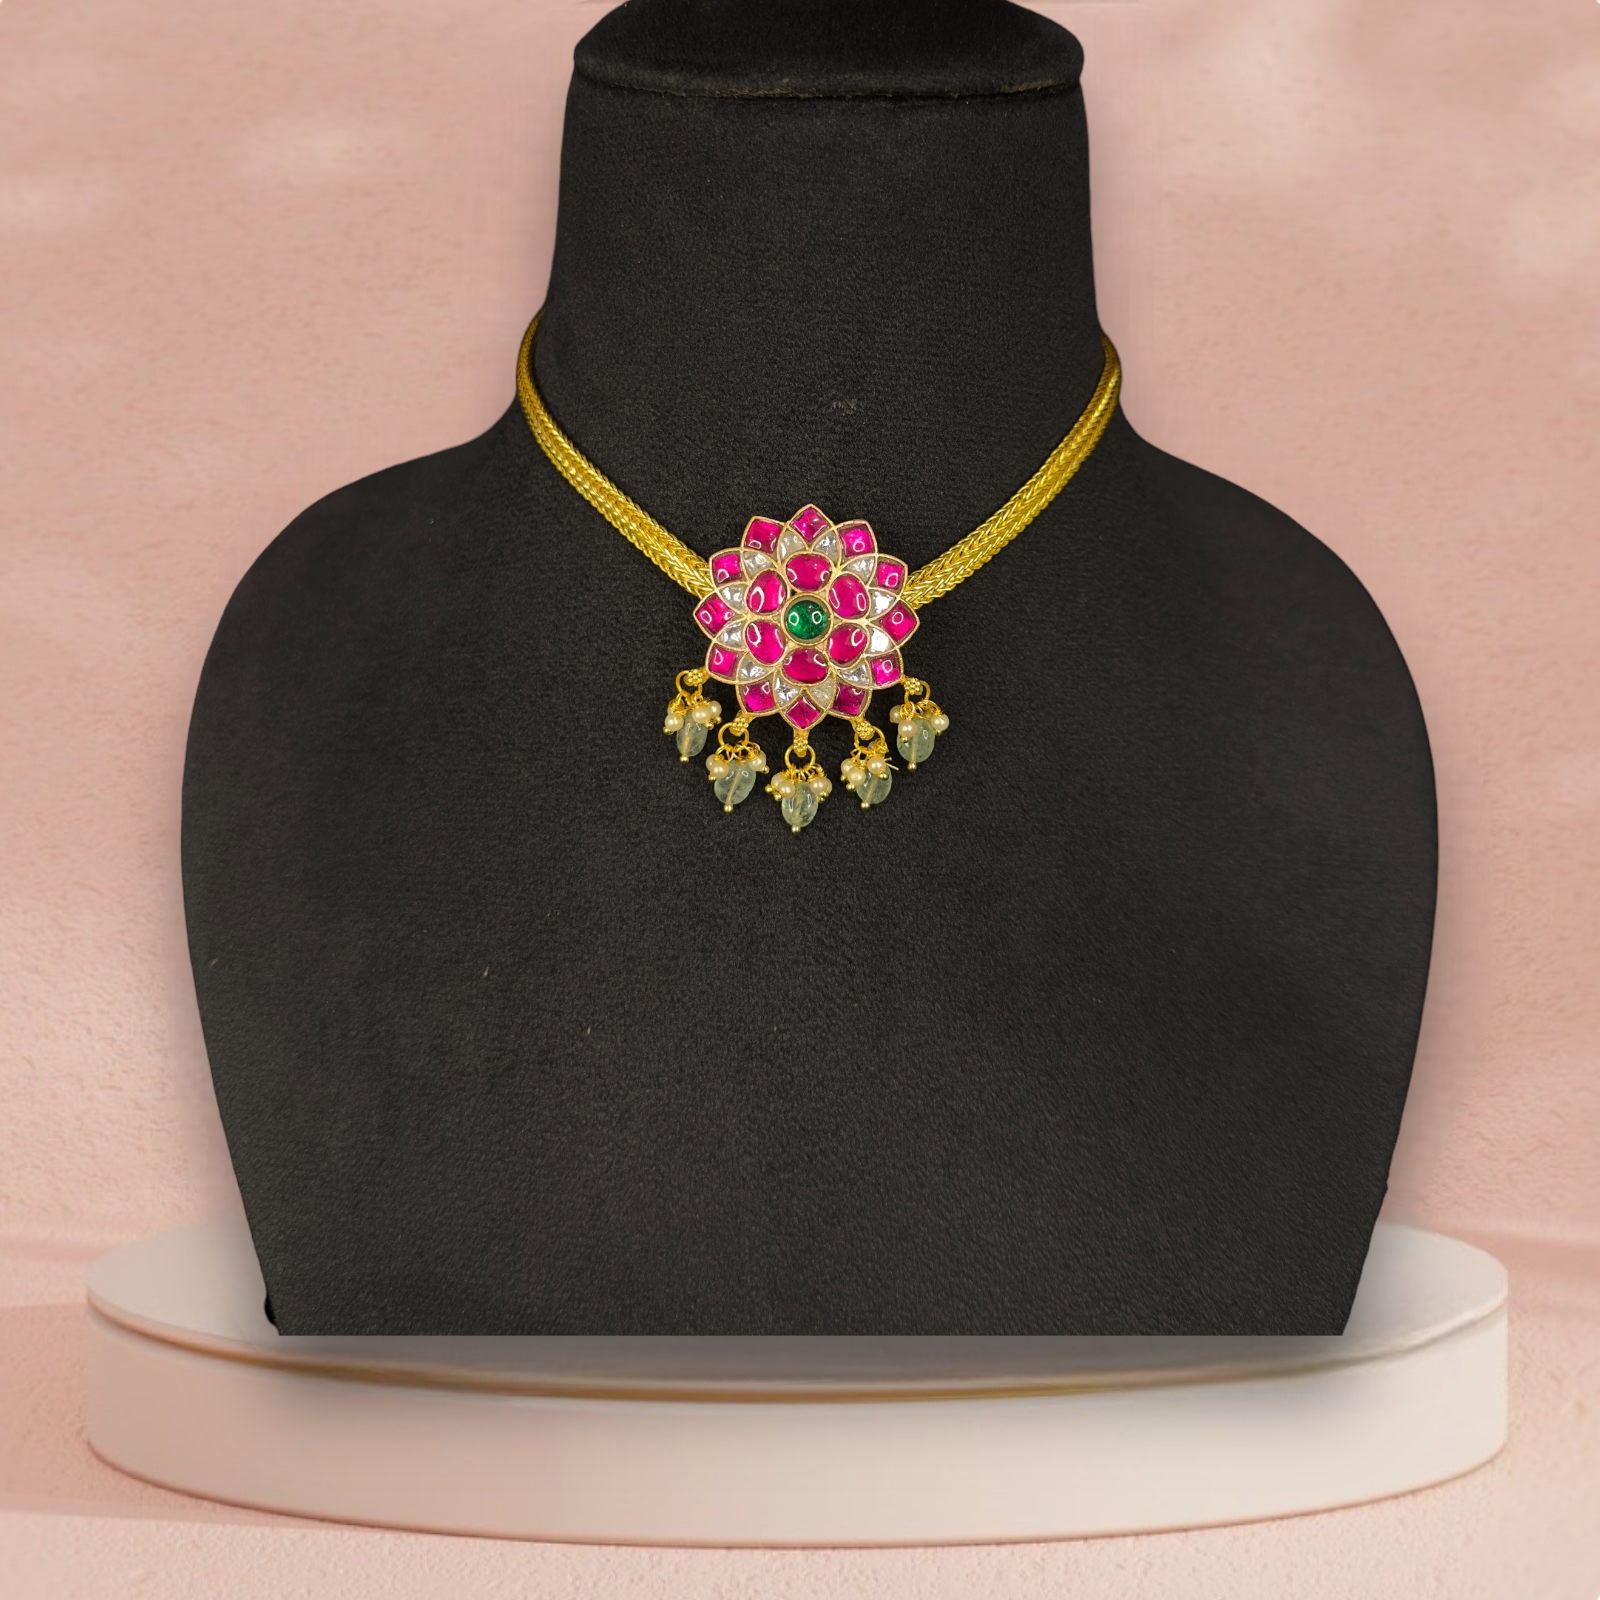 Floral Jadau Kundan Chain Pendant Necklace with Green Drops with 22k gold plating  this product belongs to jadau kundan jewellery category